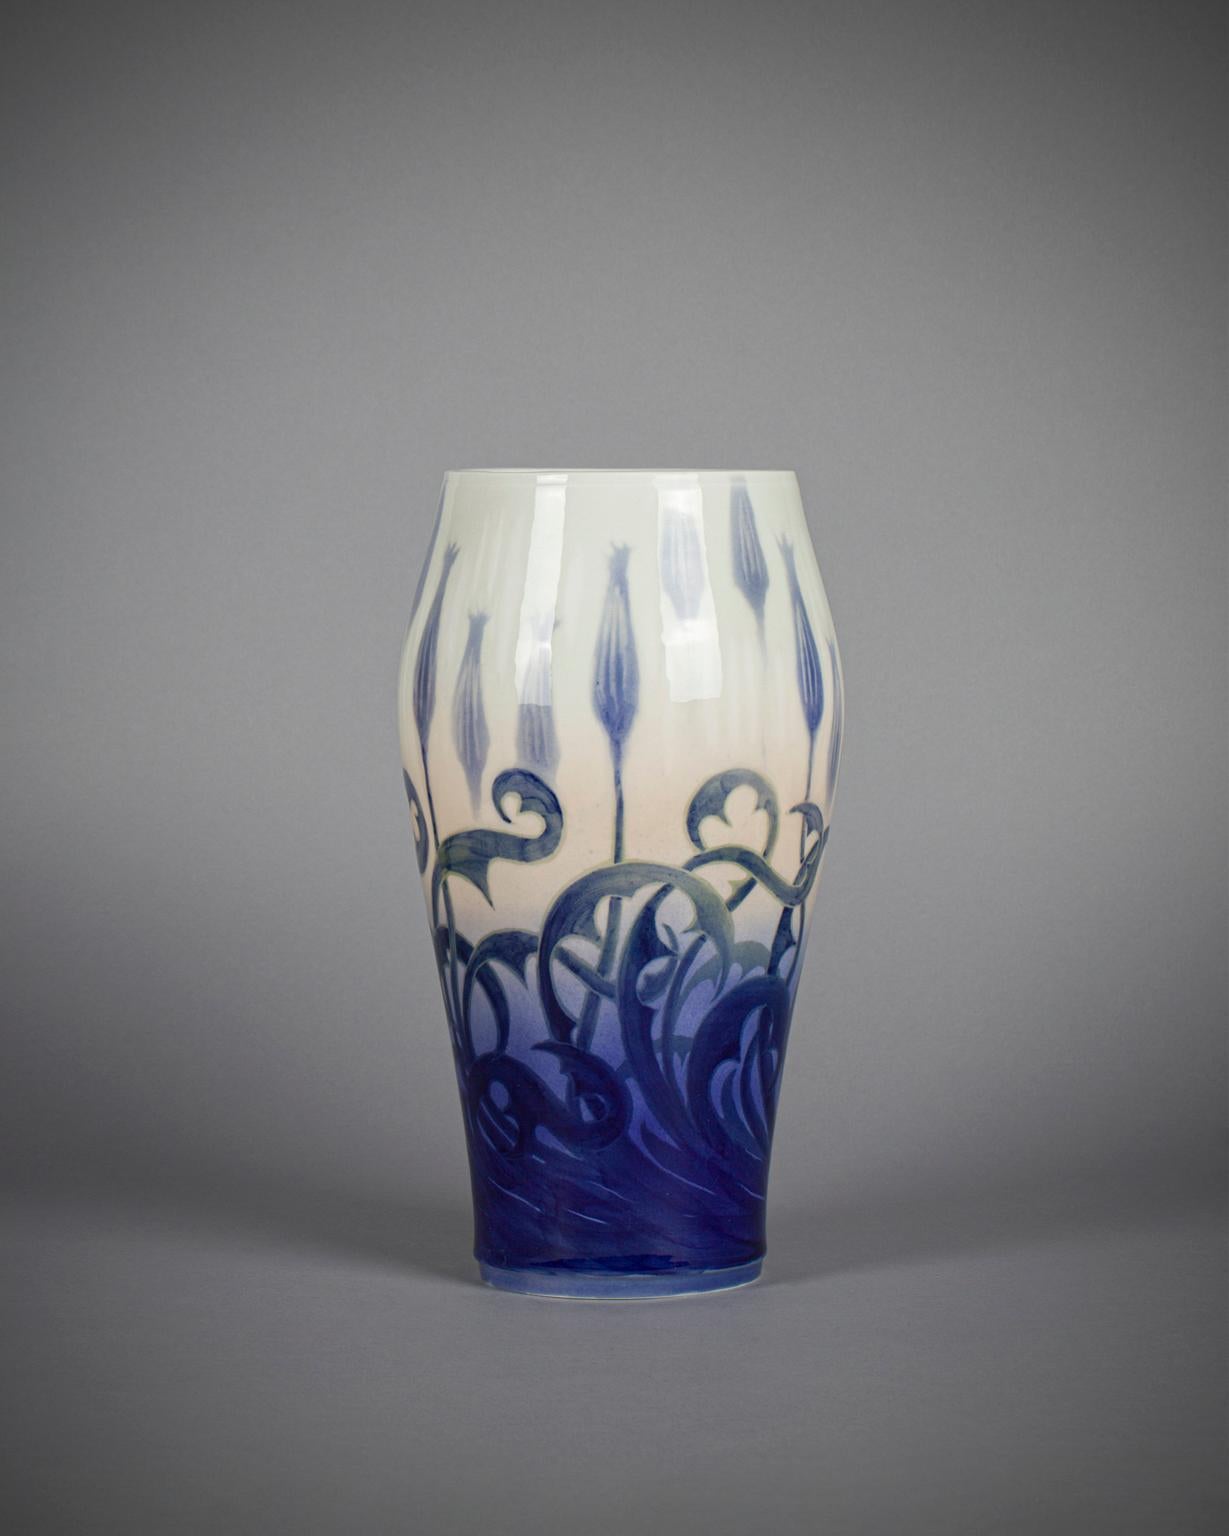 Signed Gerhard Heilmann (1859-1946) tall porcelain vase with exotic floral decoration. Copenhagen, Denmark, painted factory marks and artist's name in blue.